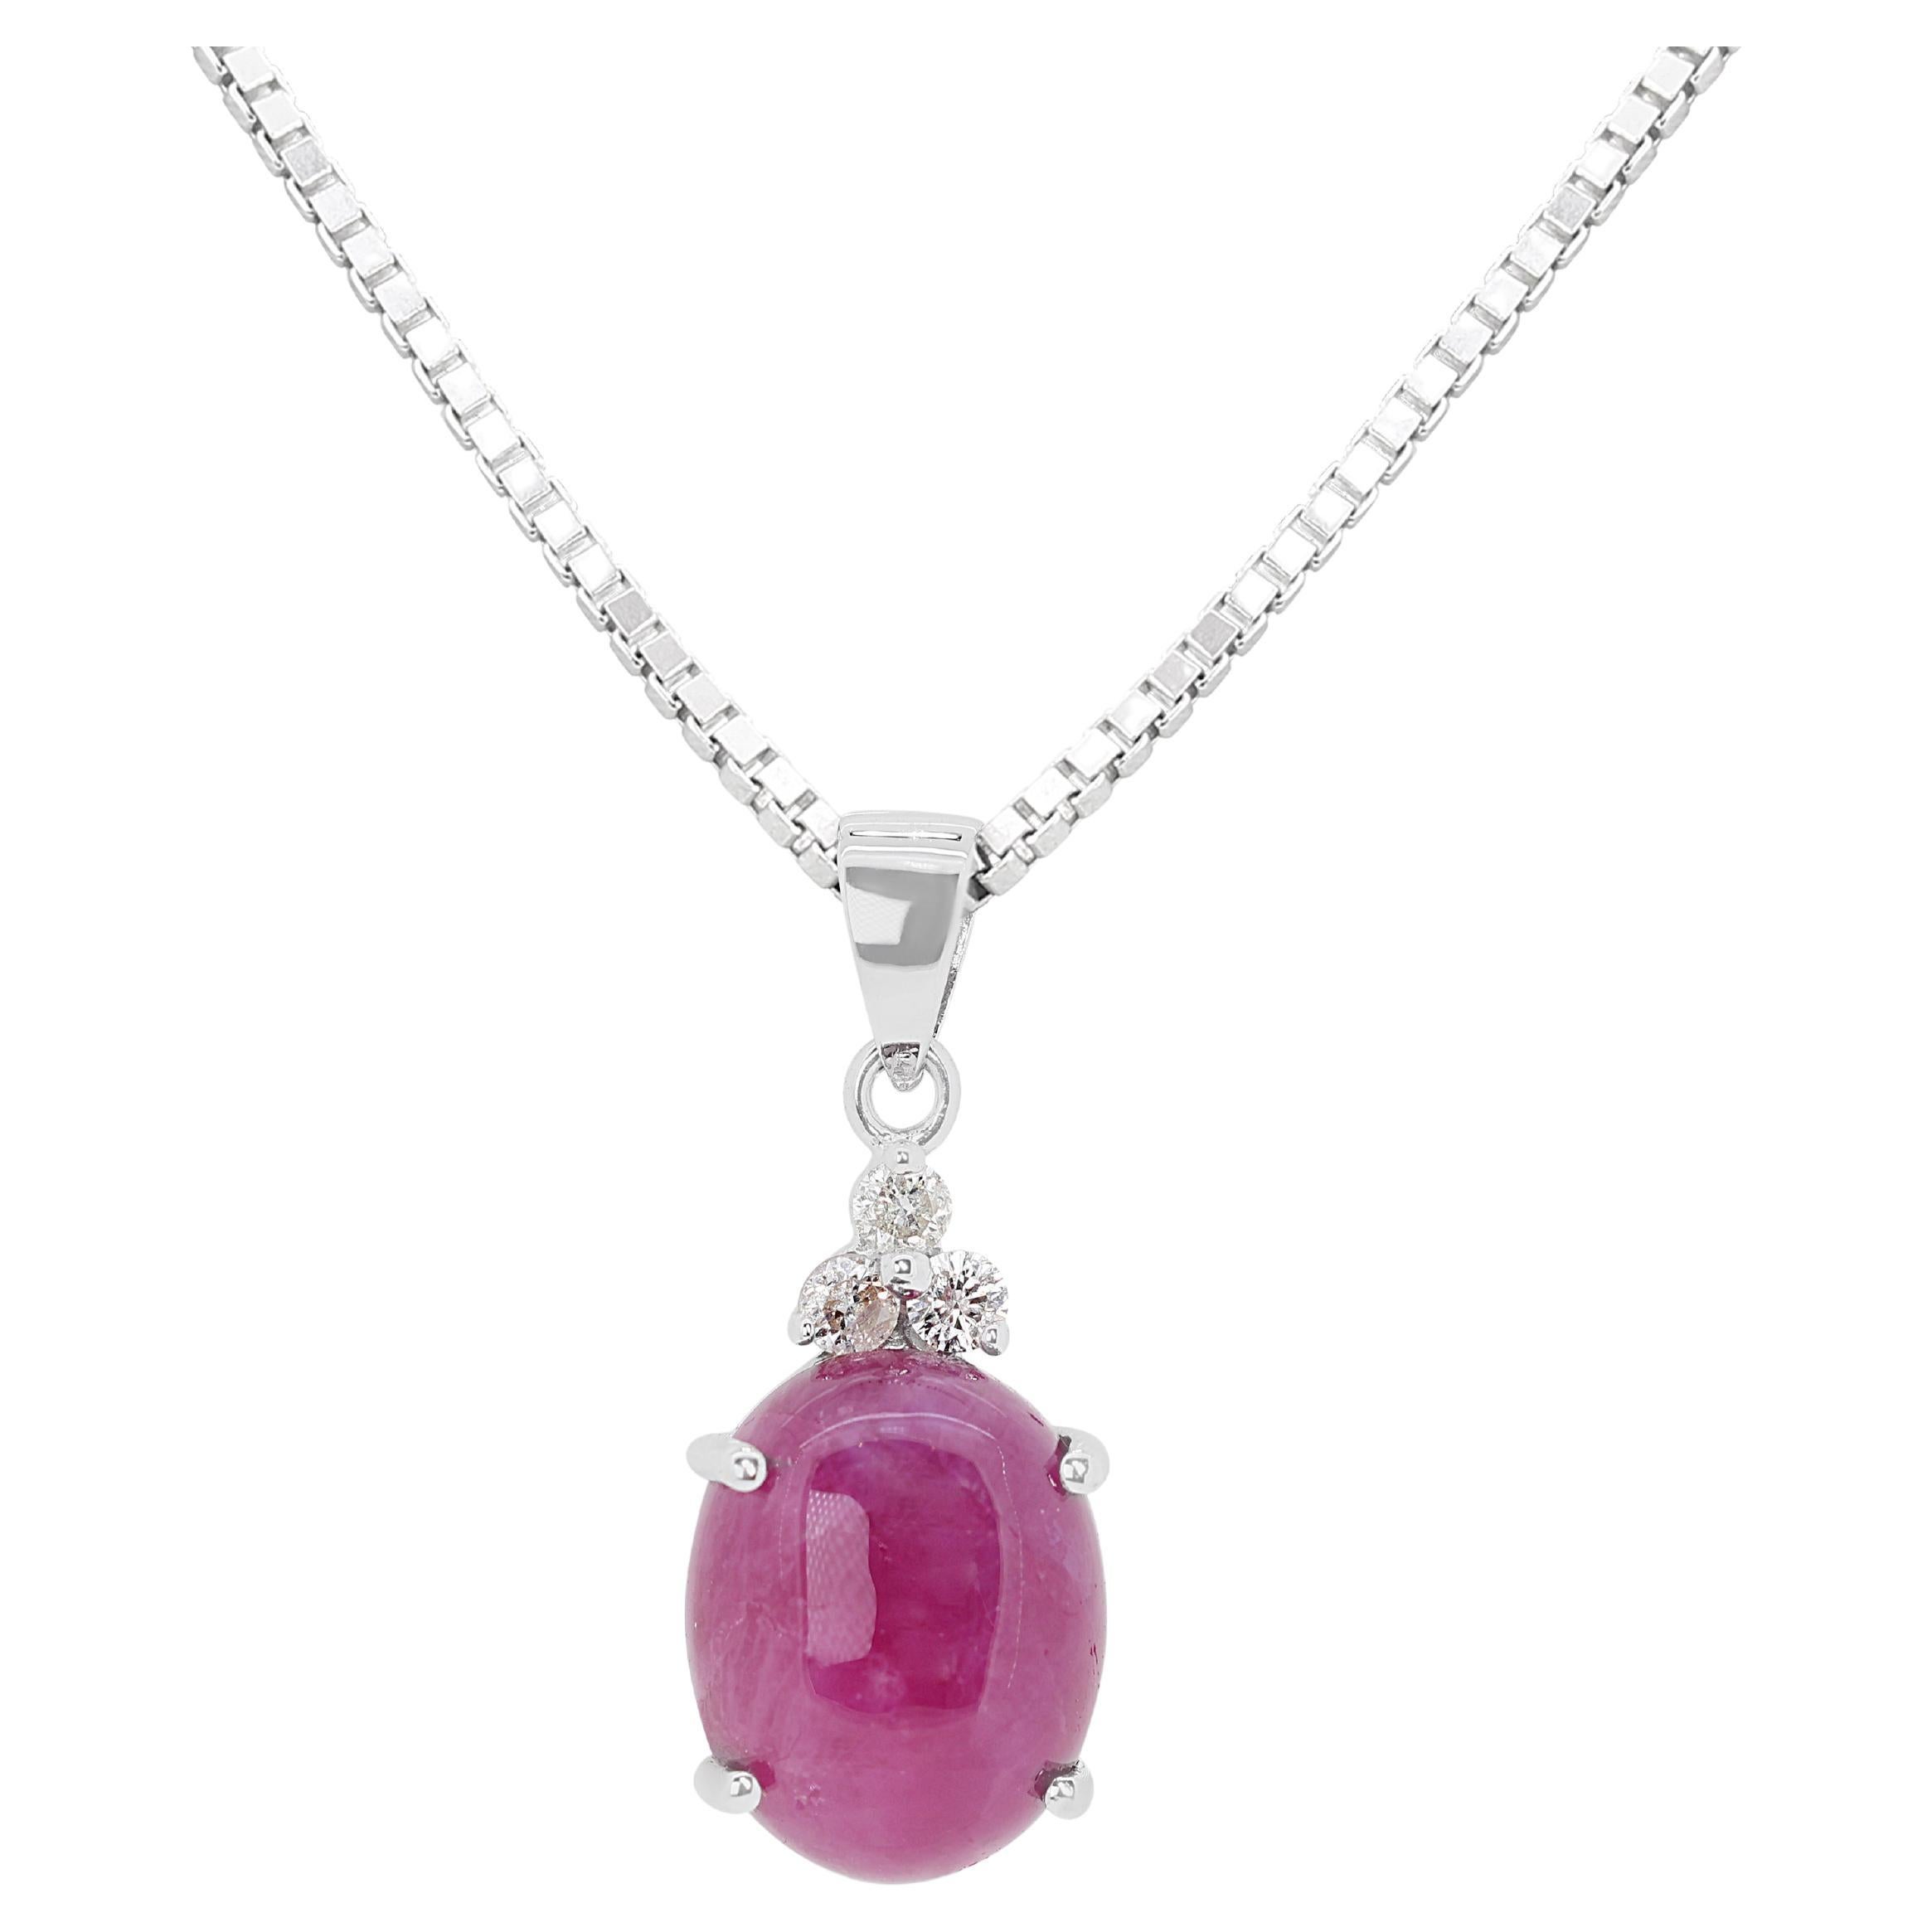 Elegant 0.40ct Ruby Pendant with Diamonds in 18K White Gold - Chain Not Included